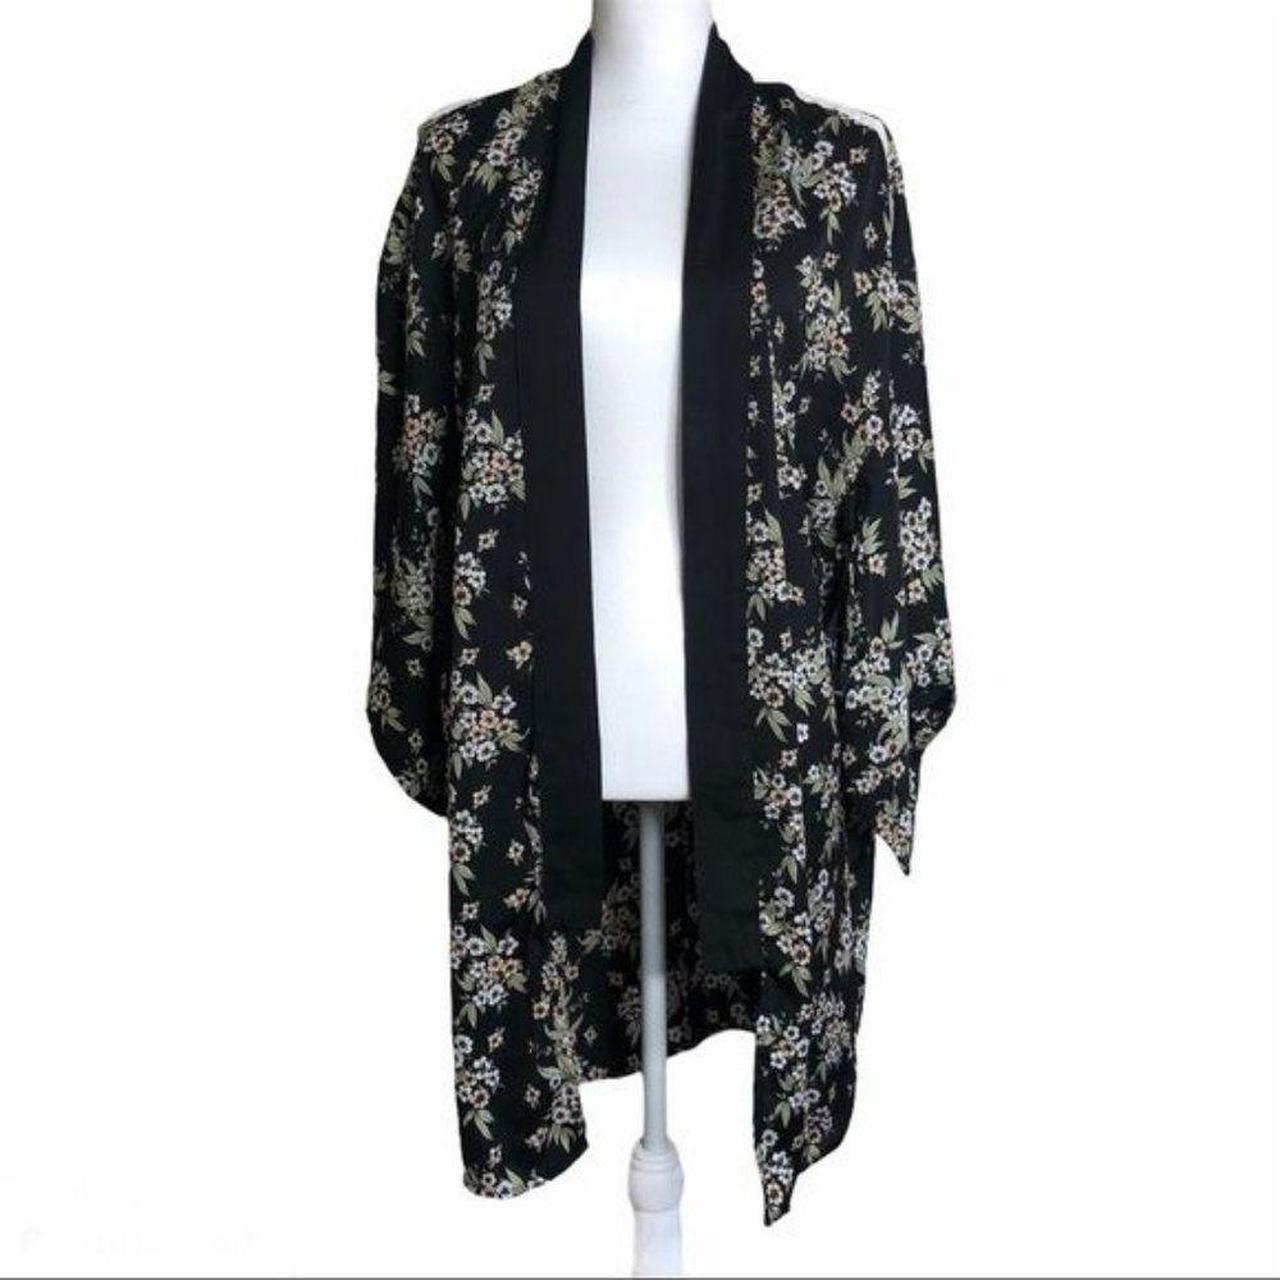 Product Image 1 - Forever 21 Floral Kimono Small

Pre